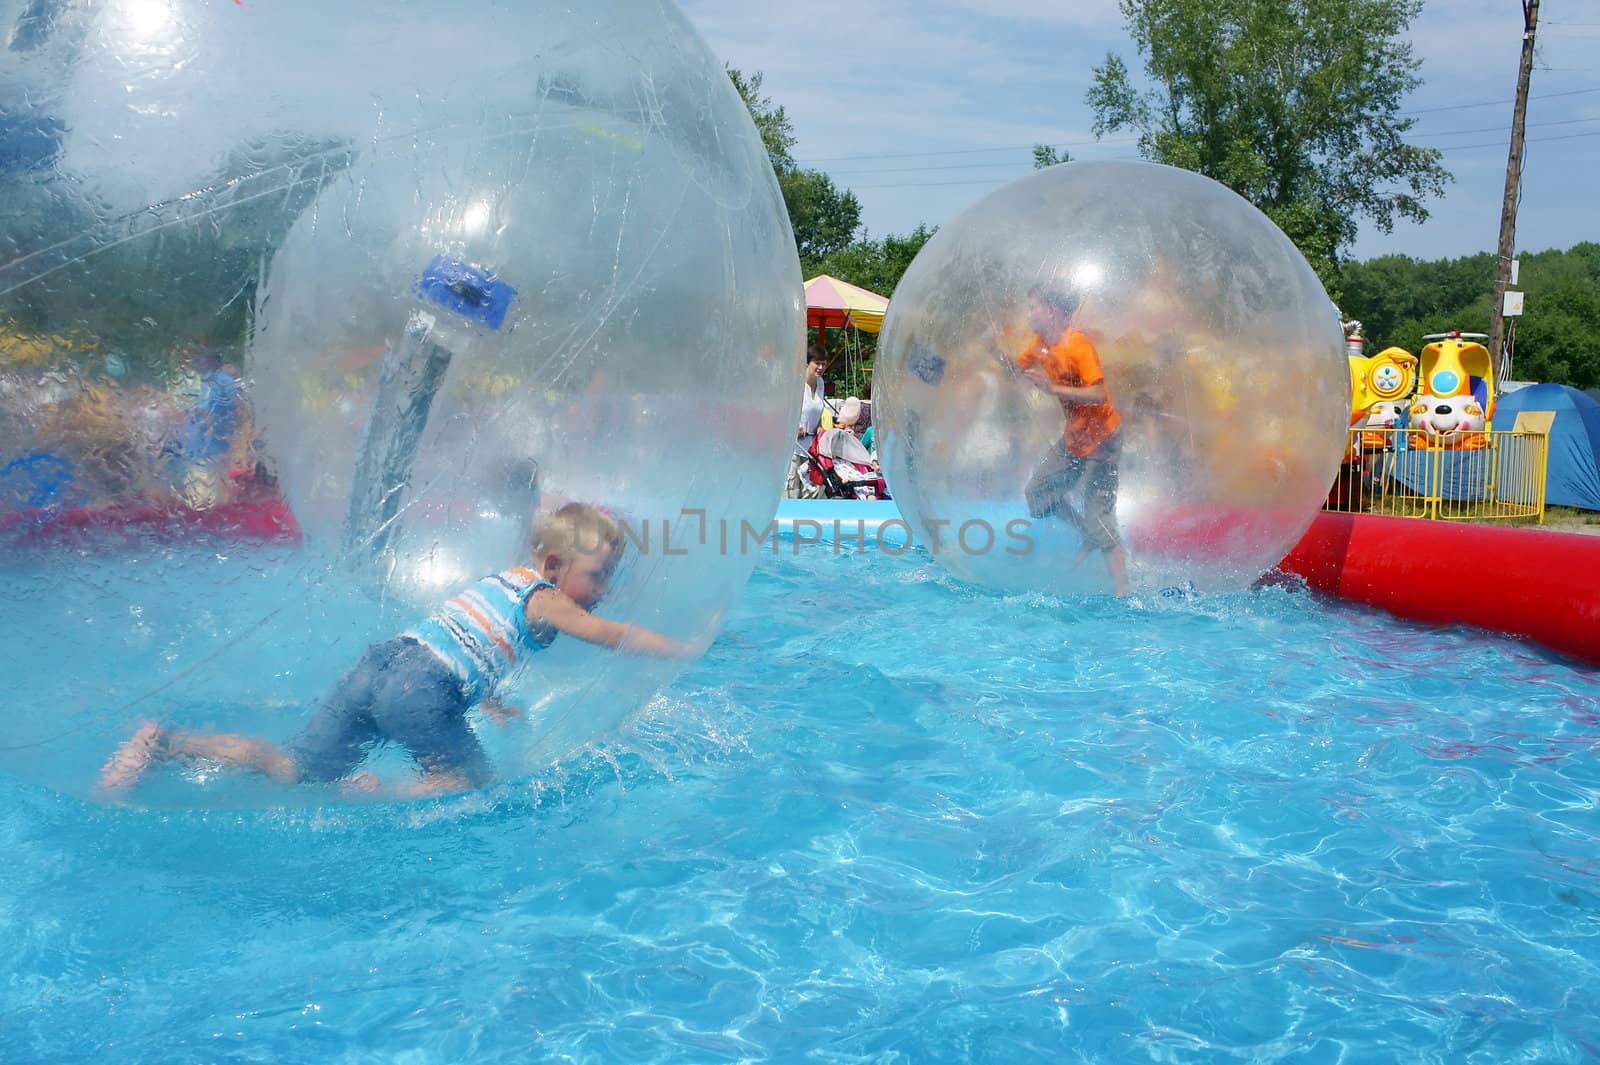 Boys riding in a large zorb balls in the pool on a summer day.